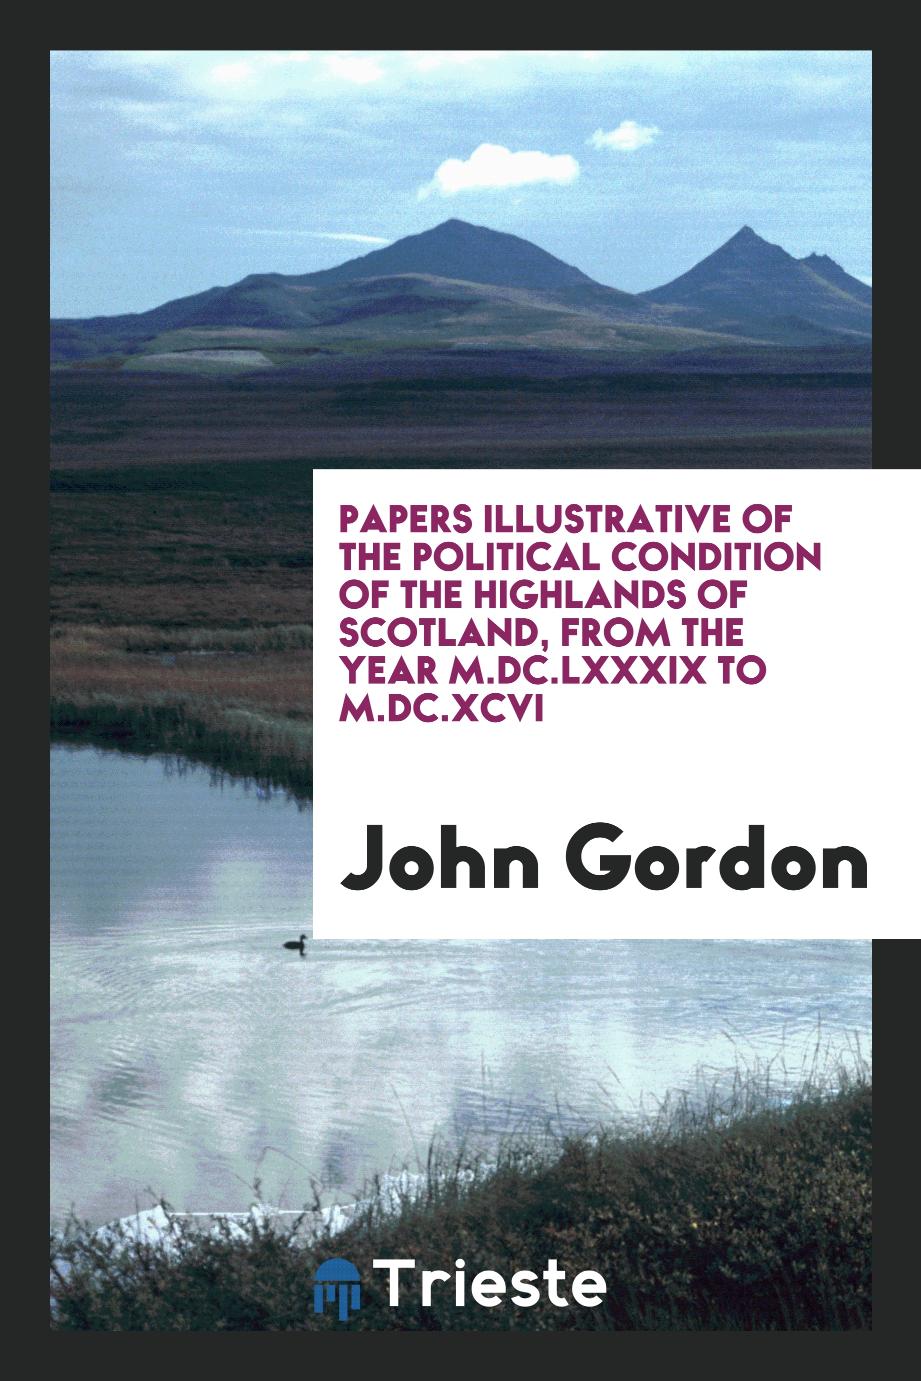 Papers Illustrative of the Political Condition of the Highlands of Scotland, from the Year M.DC.LXXXIX to M.DC.XCVI